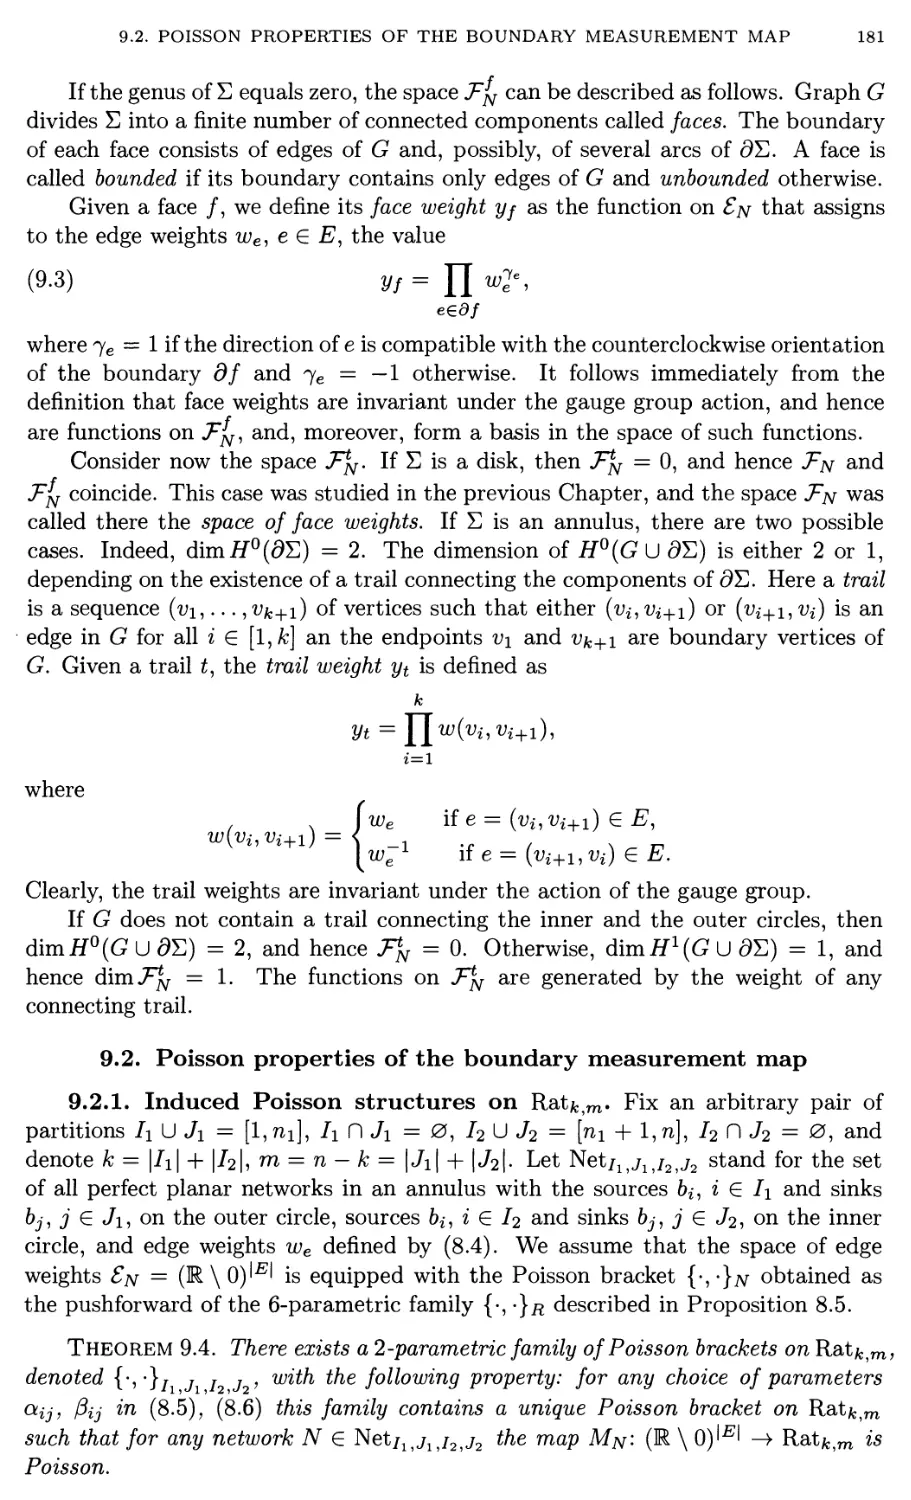 9.2. Poisson properties of the boundary measurement map 195